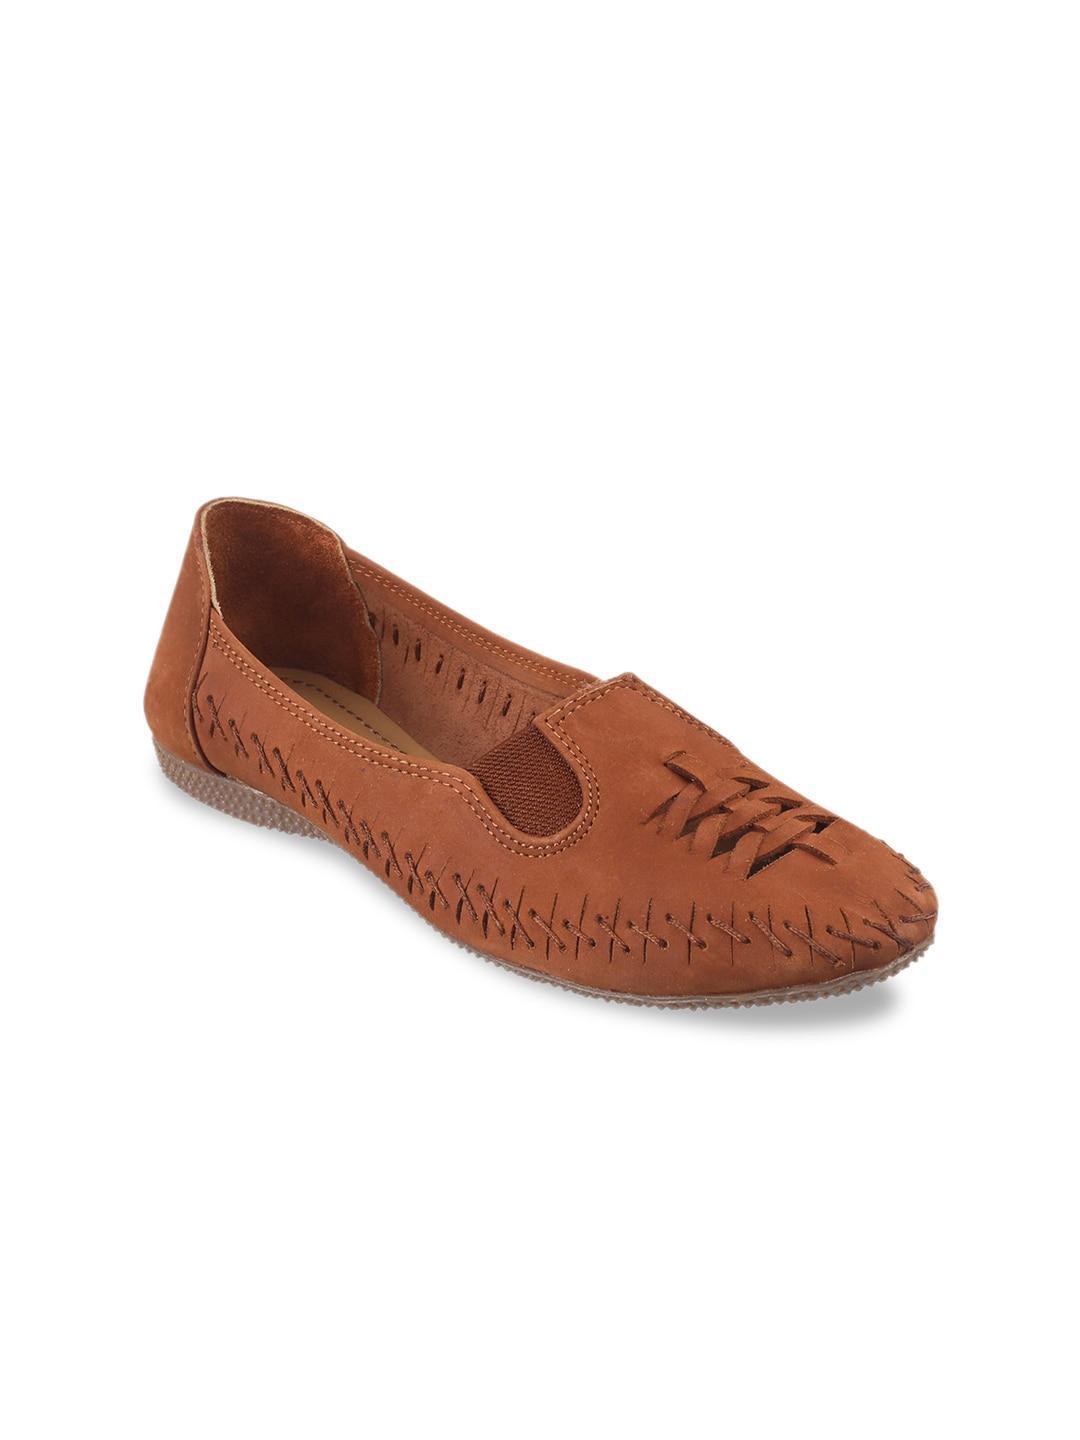 catwalk-women-tan-perforations-leather-loafers